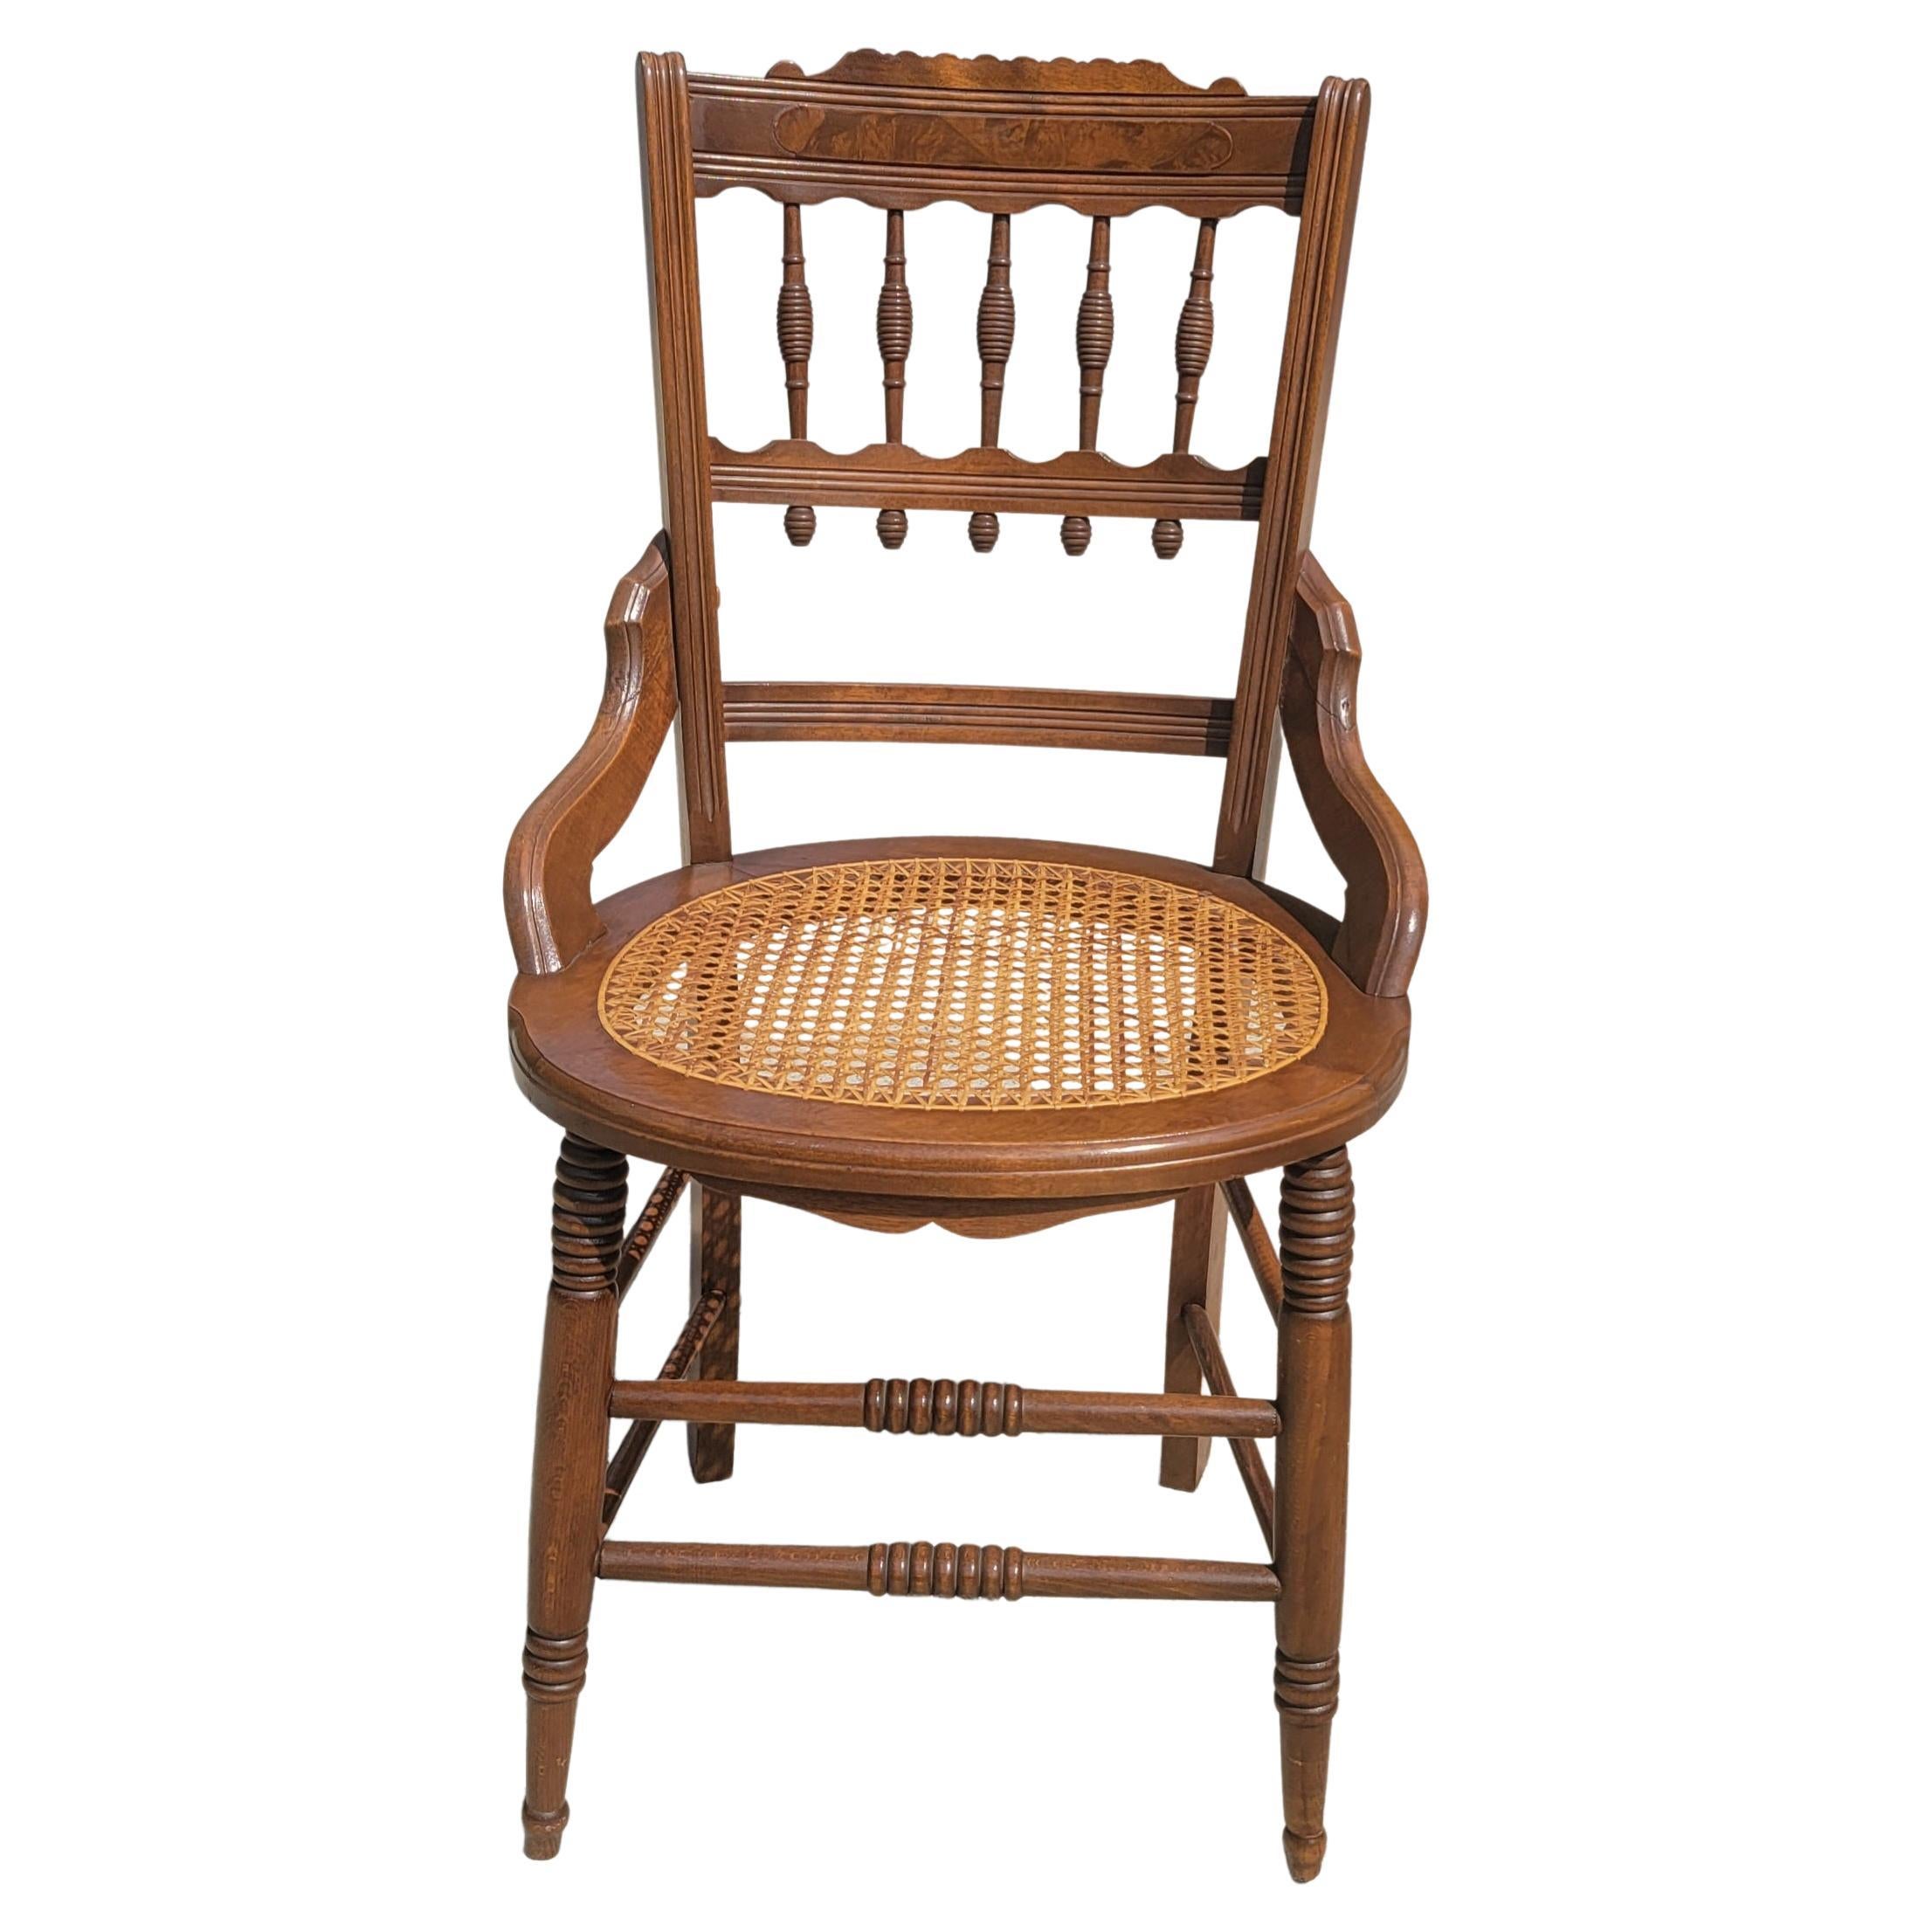 A gorgeous pair of Eastlake Victorian period carved walnut with cane seat chairs. Recently refinished and recaned. Will sparkle any room in your home. Use them as additional chairs in your dining room or kitchen.